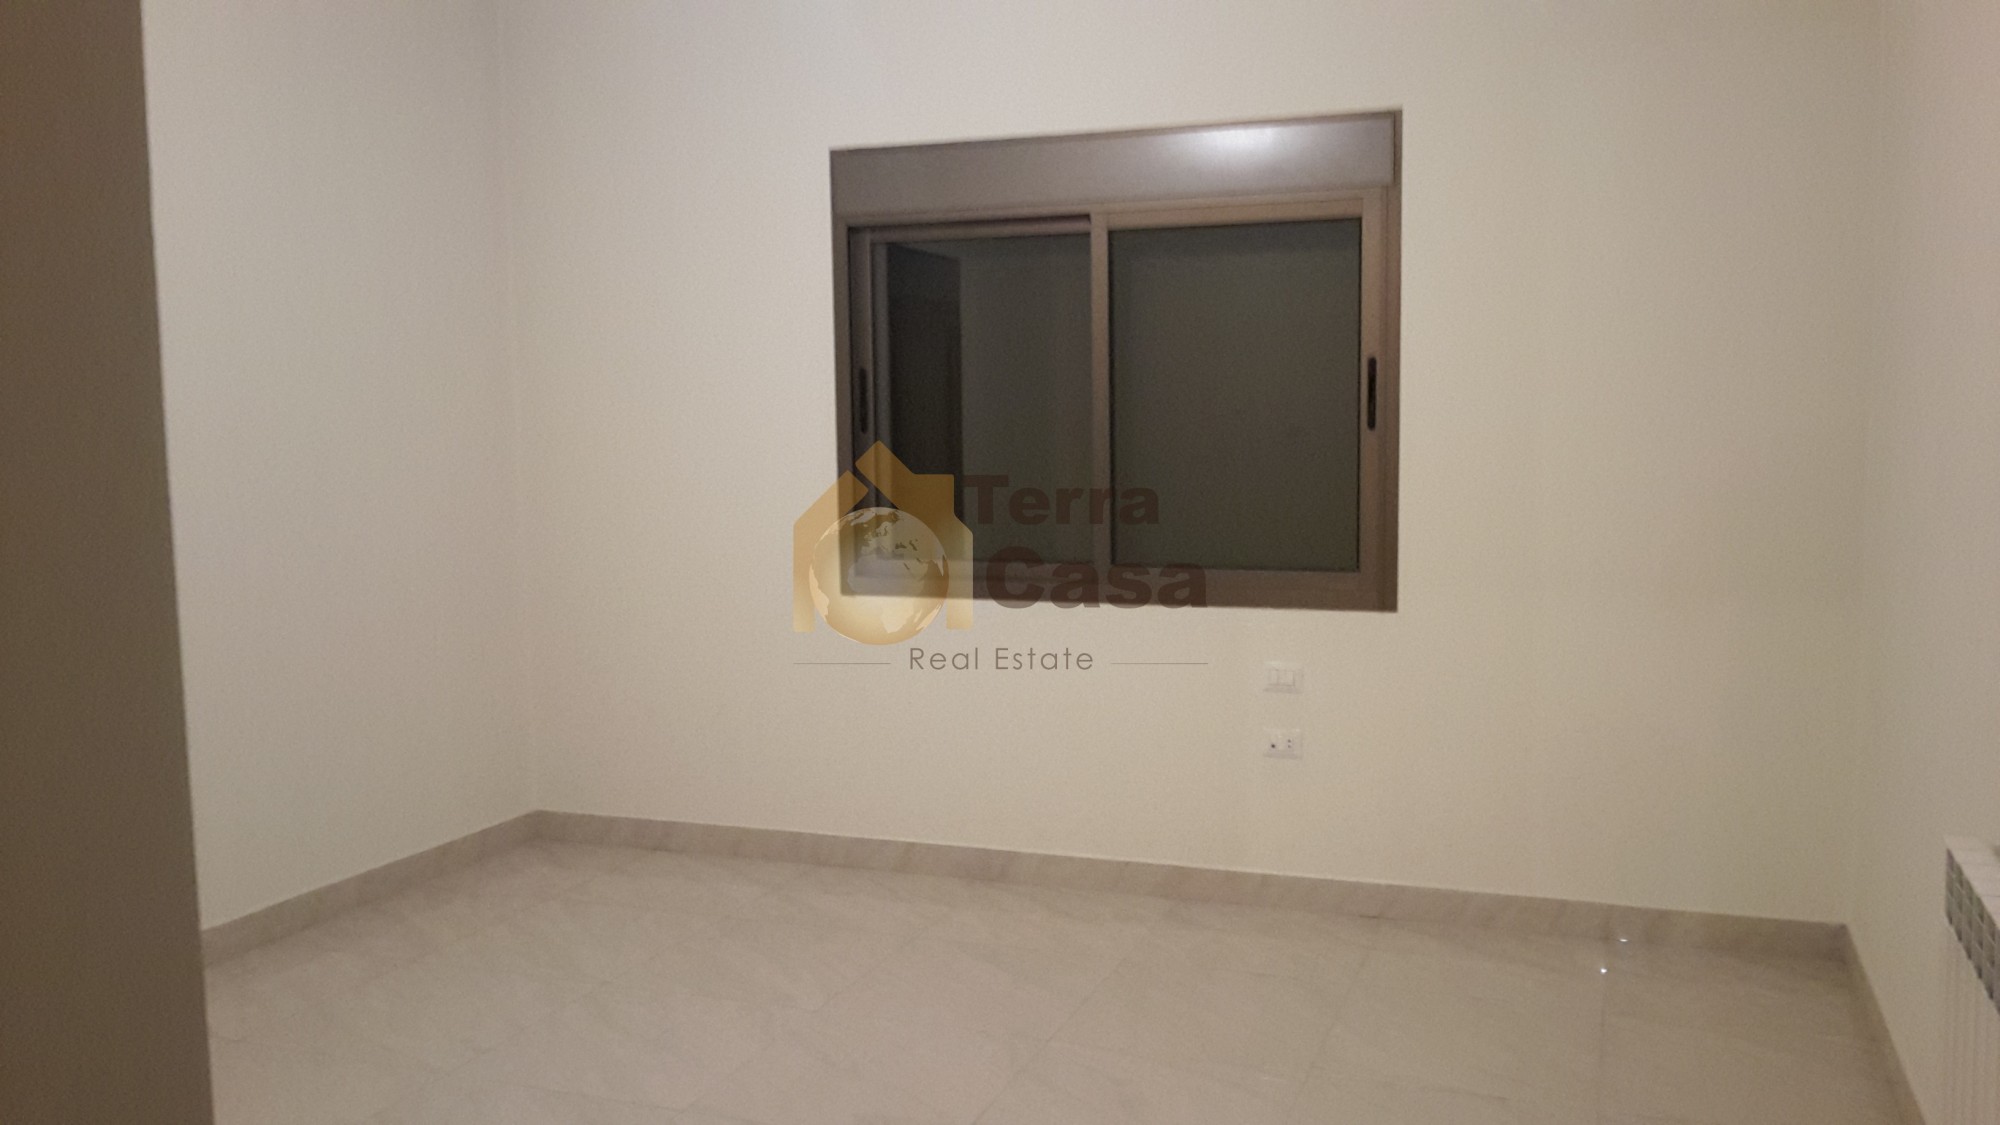 Apartment for sale in Haouch el omara brand new  in a prime location .